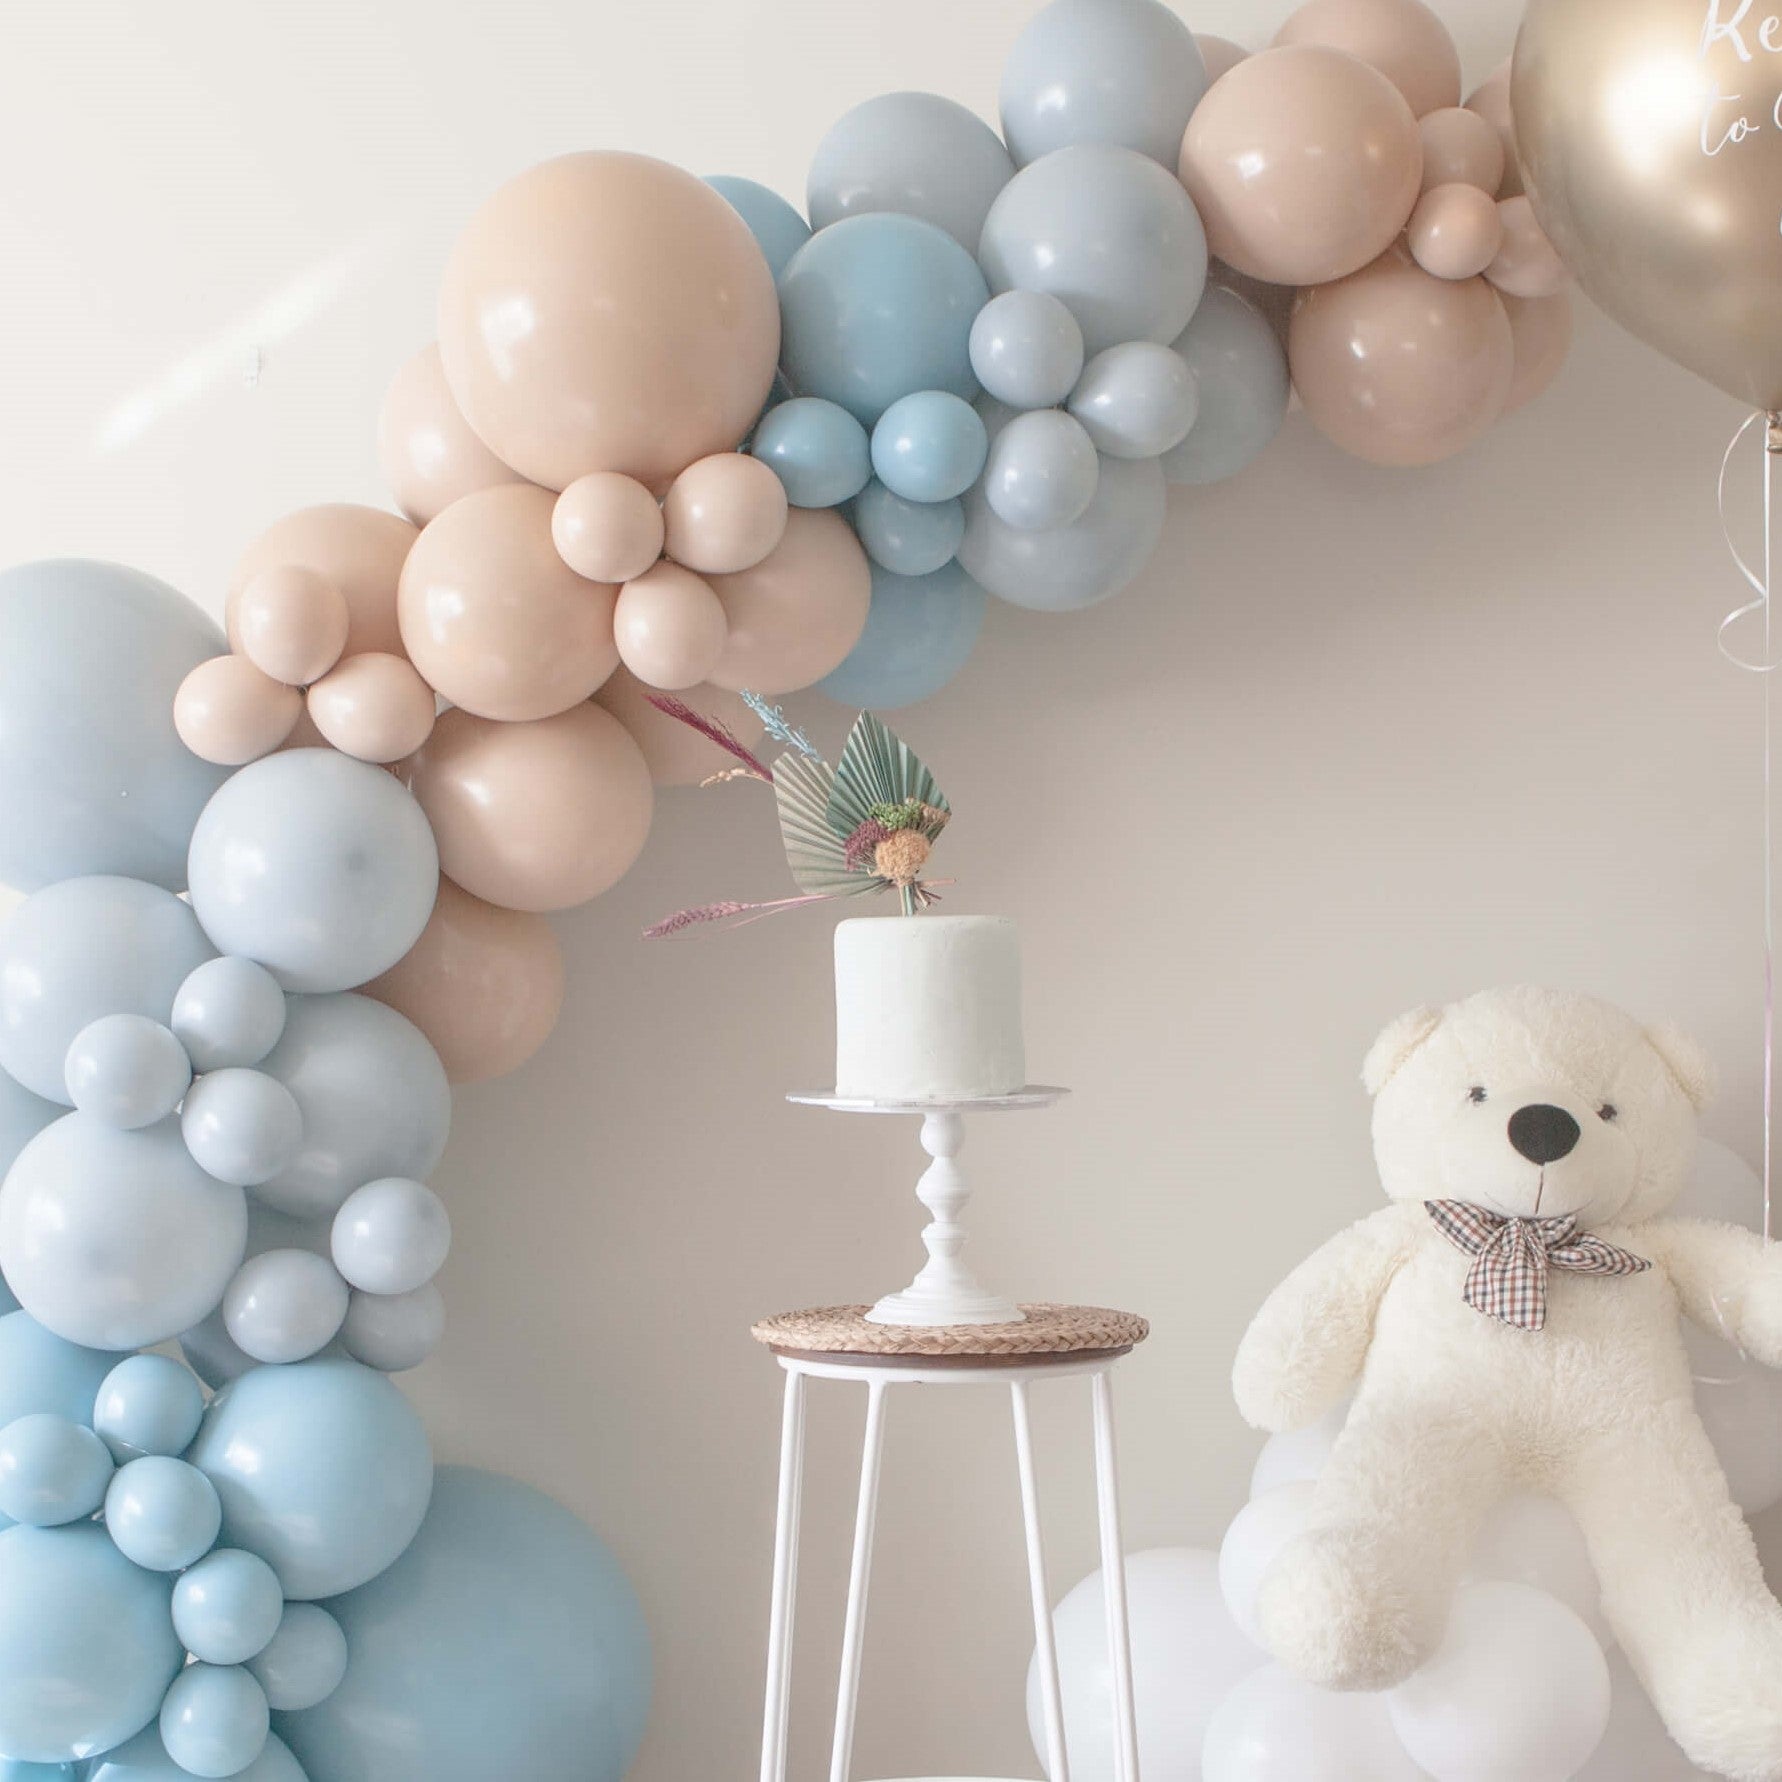 My Party Box We Can't Bearly Wait Gender Reveal Balloon Garland DIY Kit - Seaglass & Blush with Solid Seaglass, Solid Fog & Blush brown latex balloons